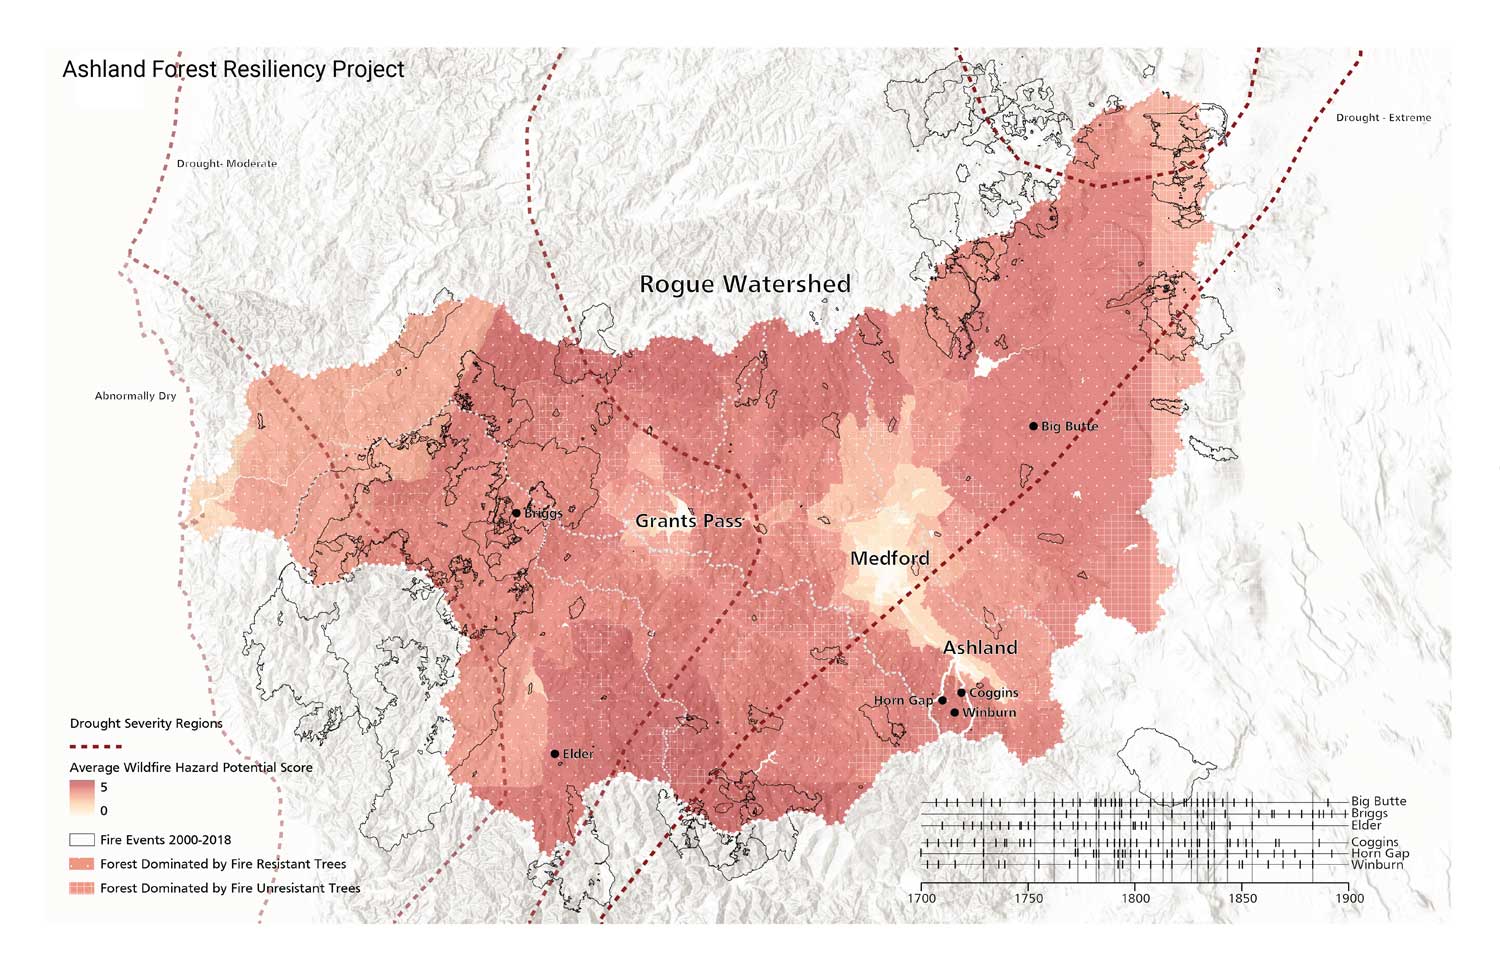 An annotated map of the Ashland, Oregon area showing regions with high Wildfire Hazard scores.